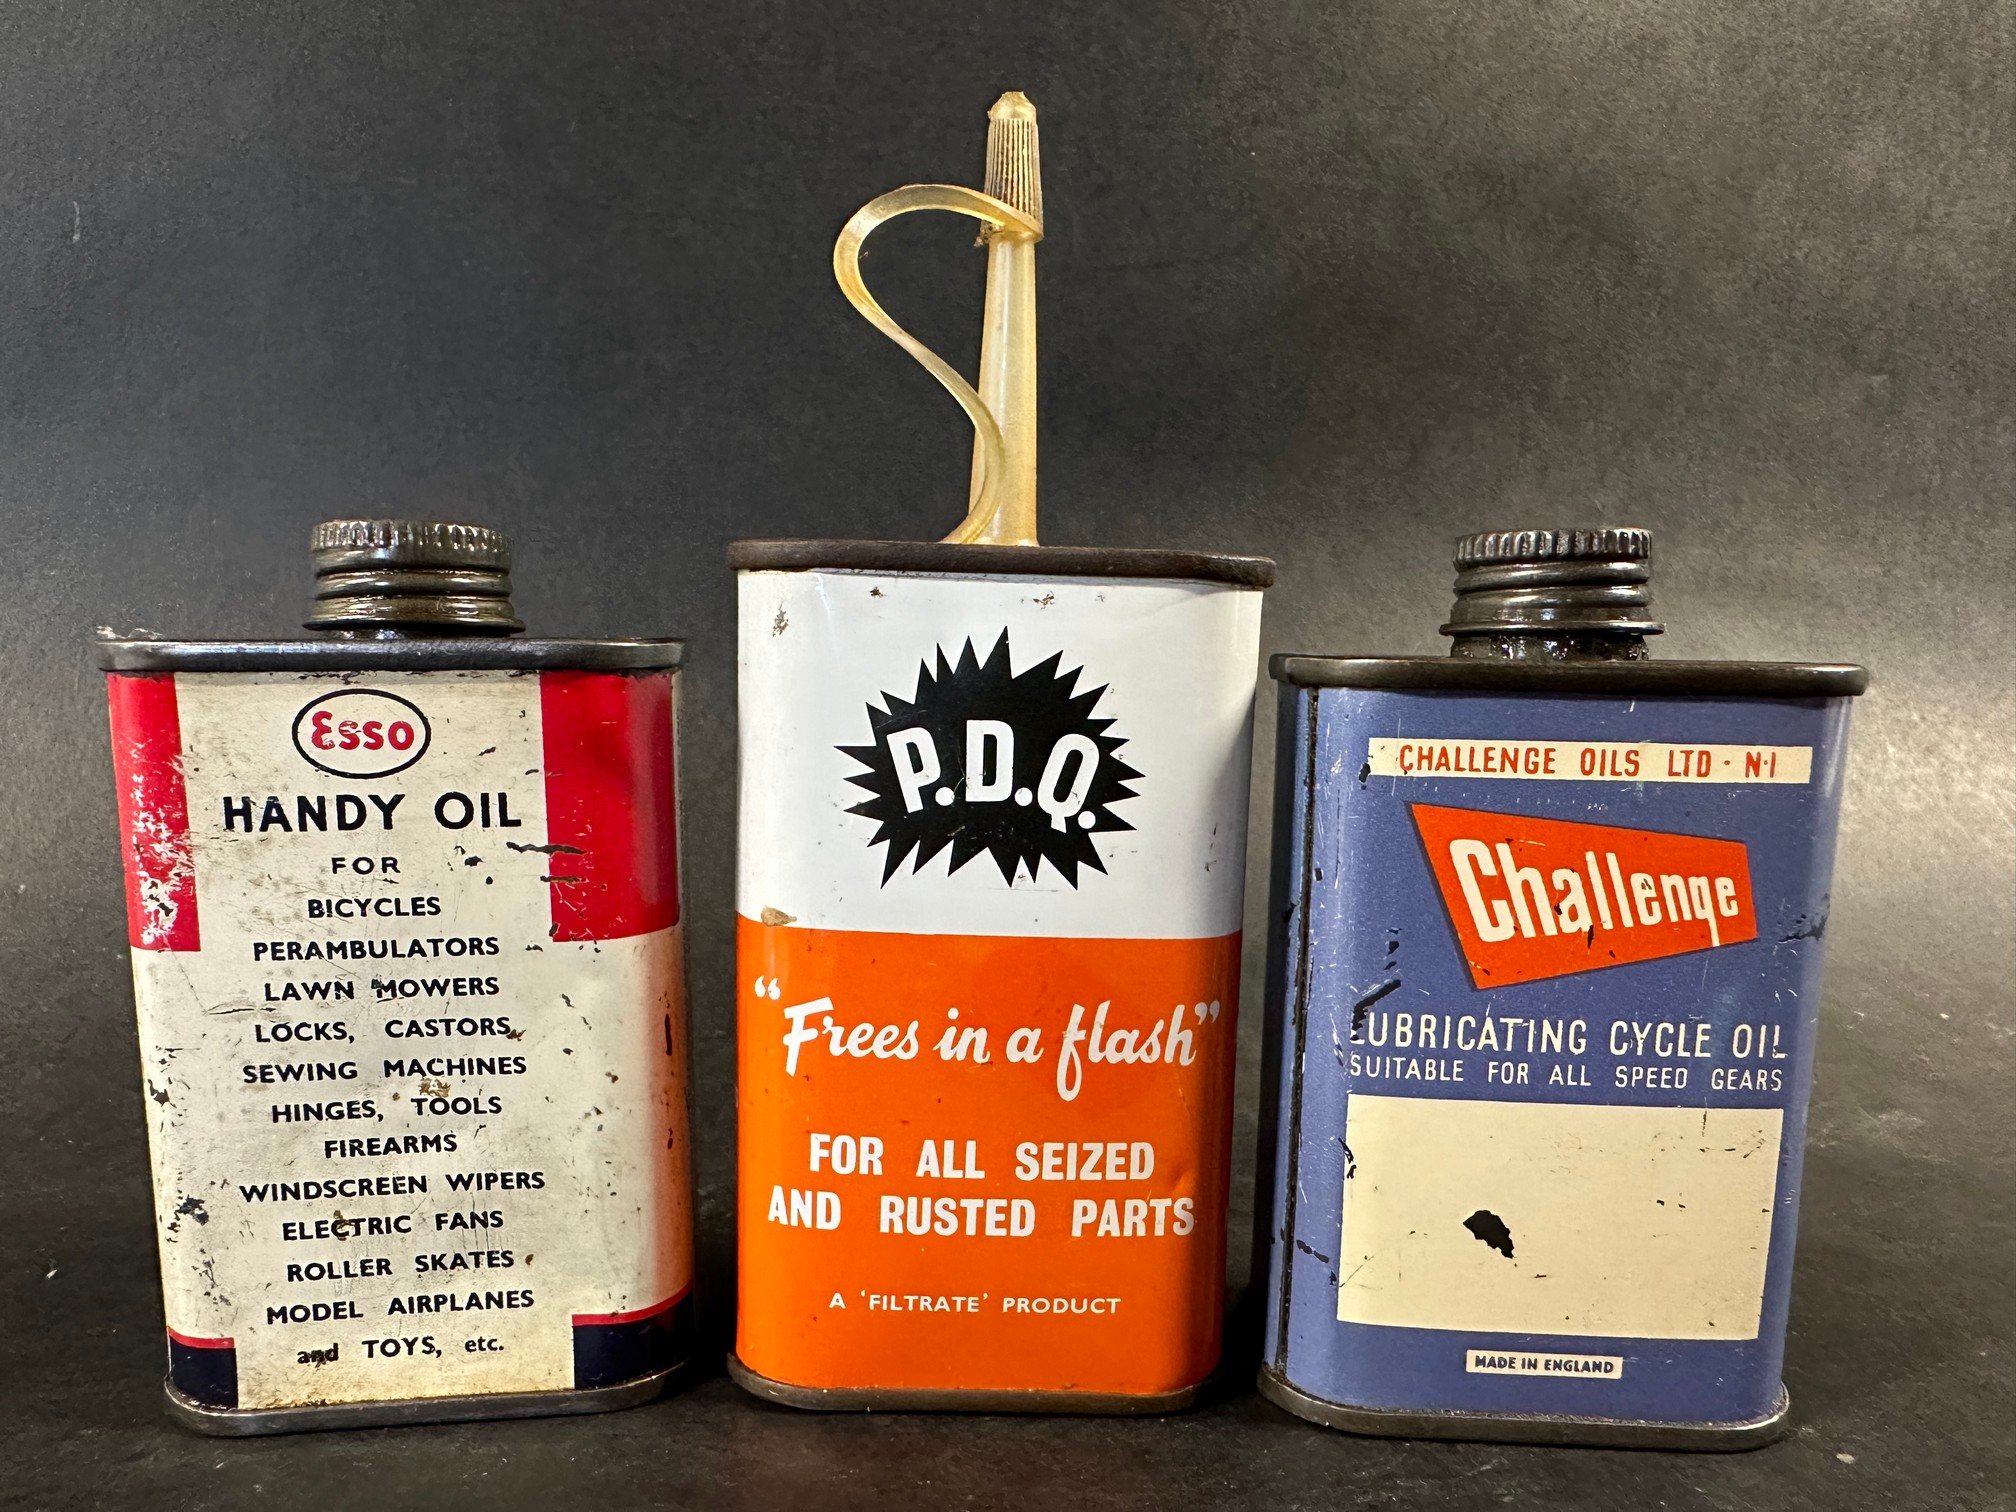 An Esso Handy Oil tin, a Challenge Lubricating Cycle Oil tin and a Filtrate P.D.Q. oil tin. - Image 2 of 3